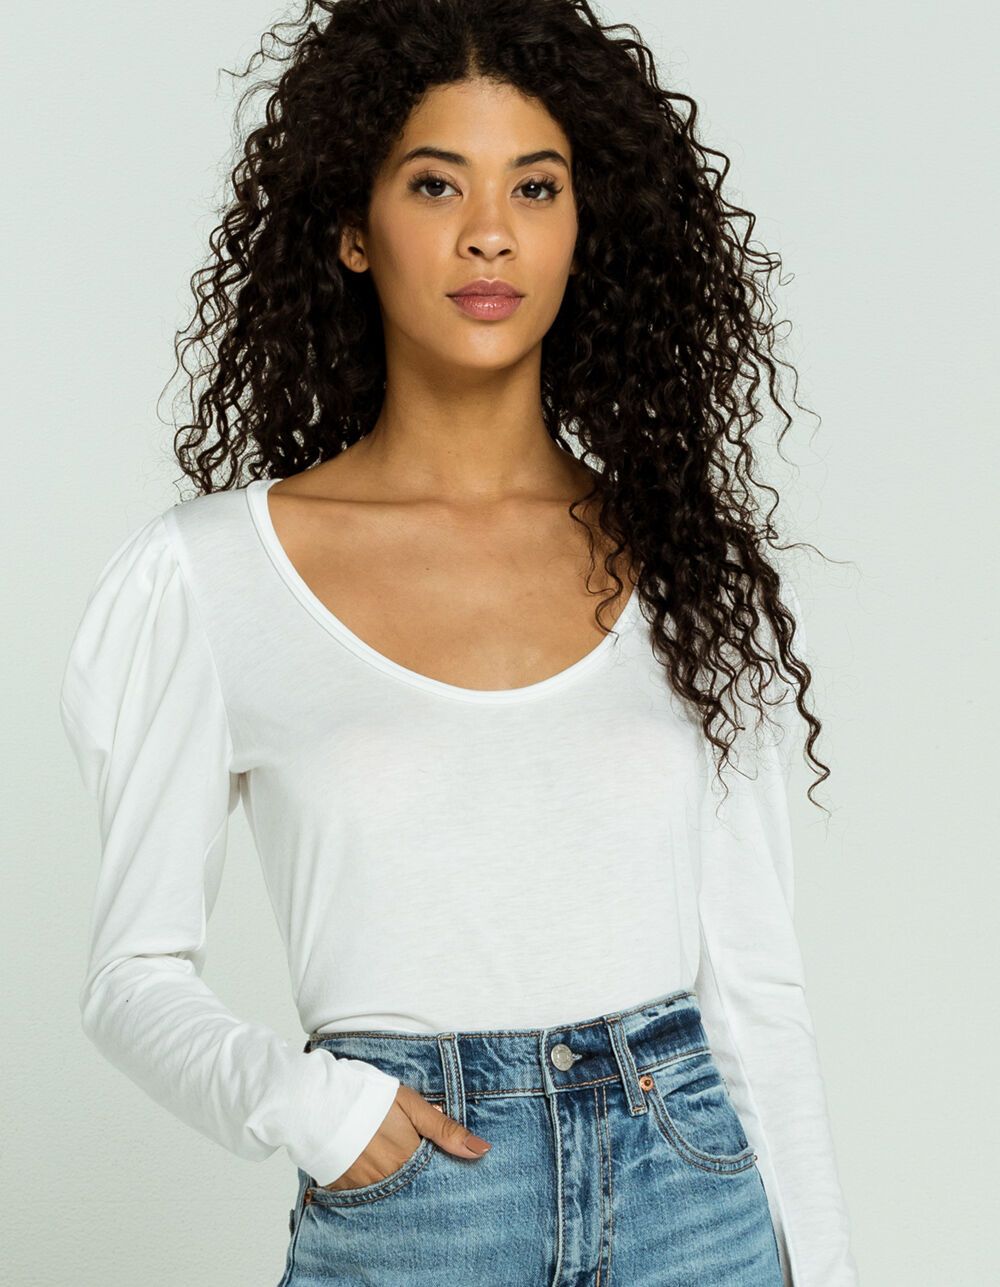 WEST OF MELROSE Strut Your Puff Sleeve White Top | Tillys